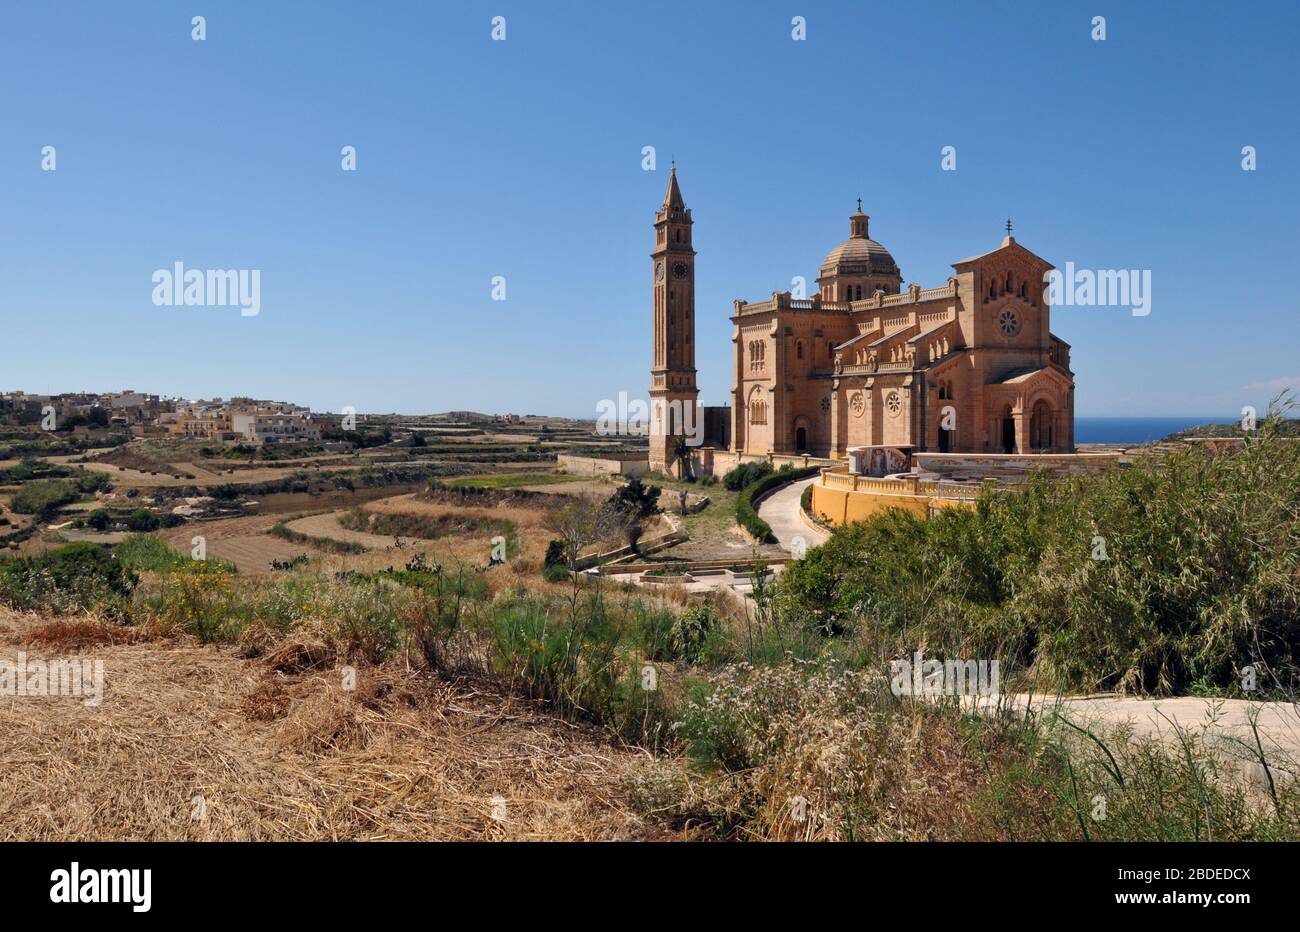 The Ta' Pinu National Shrine at Gharb on the island of Gozo, Malta, is a popular destination for tourists and pilgrims, and was consecrated in 1932. Stock Photo